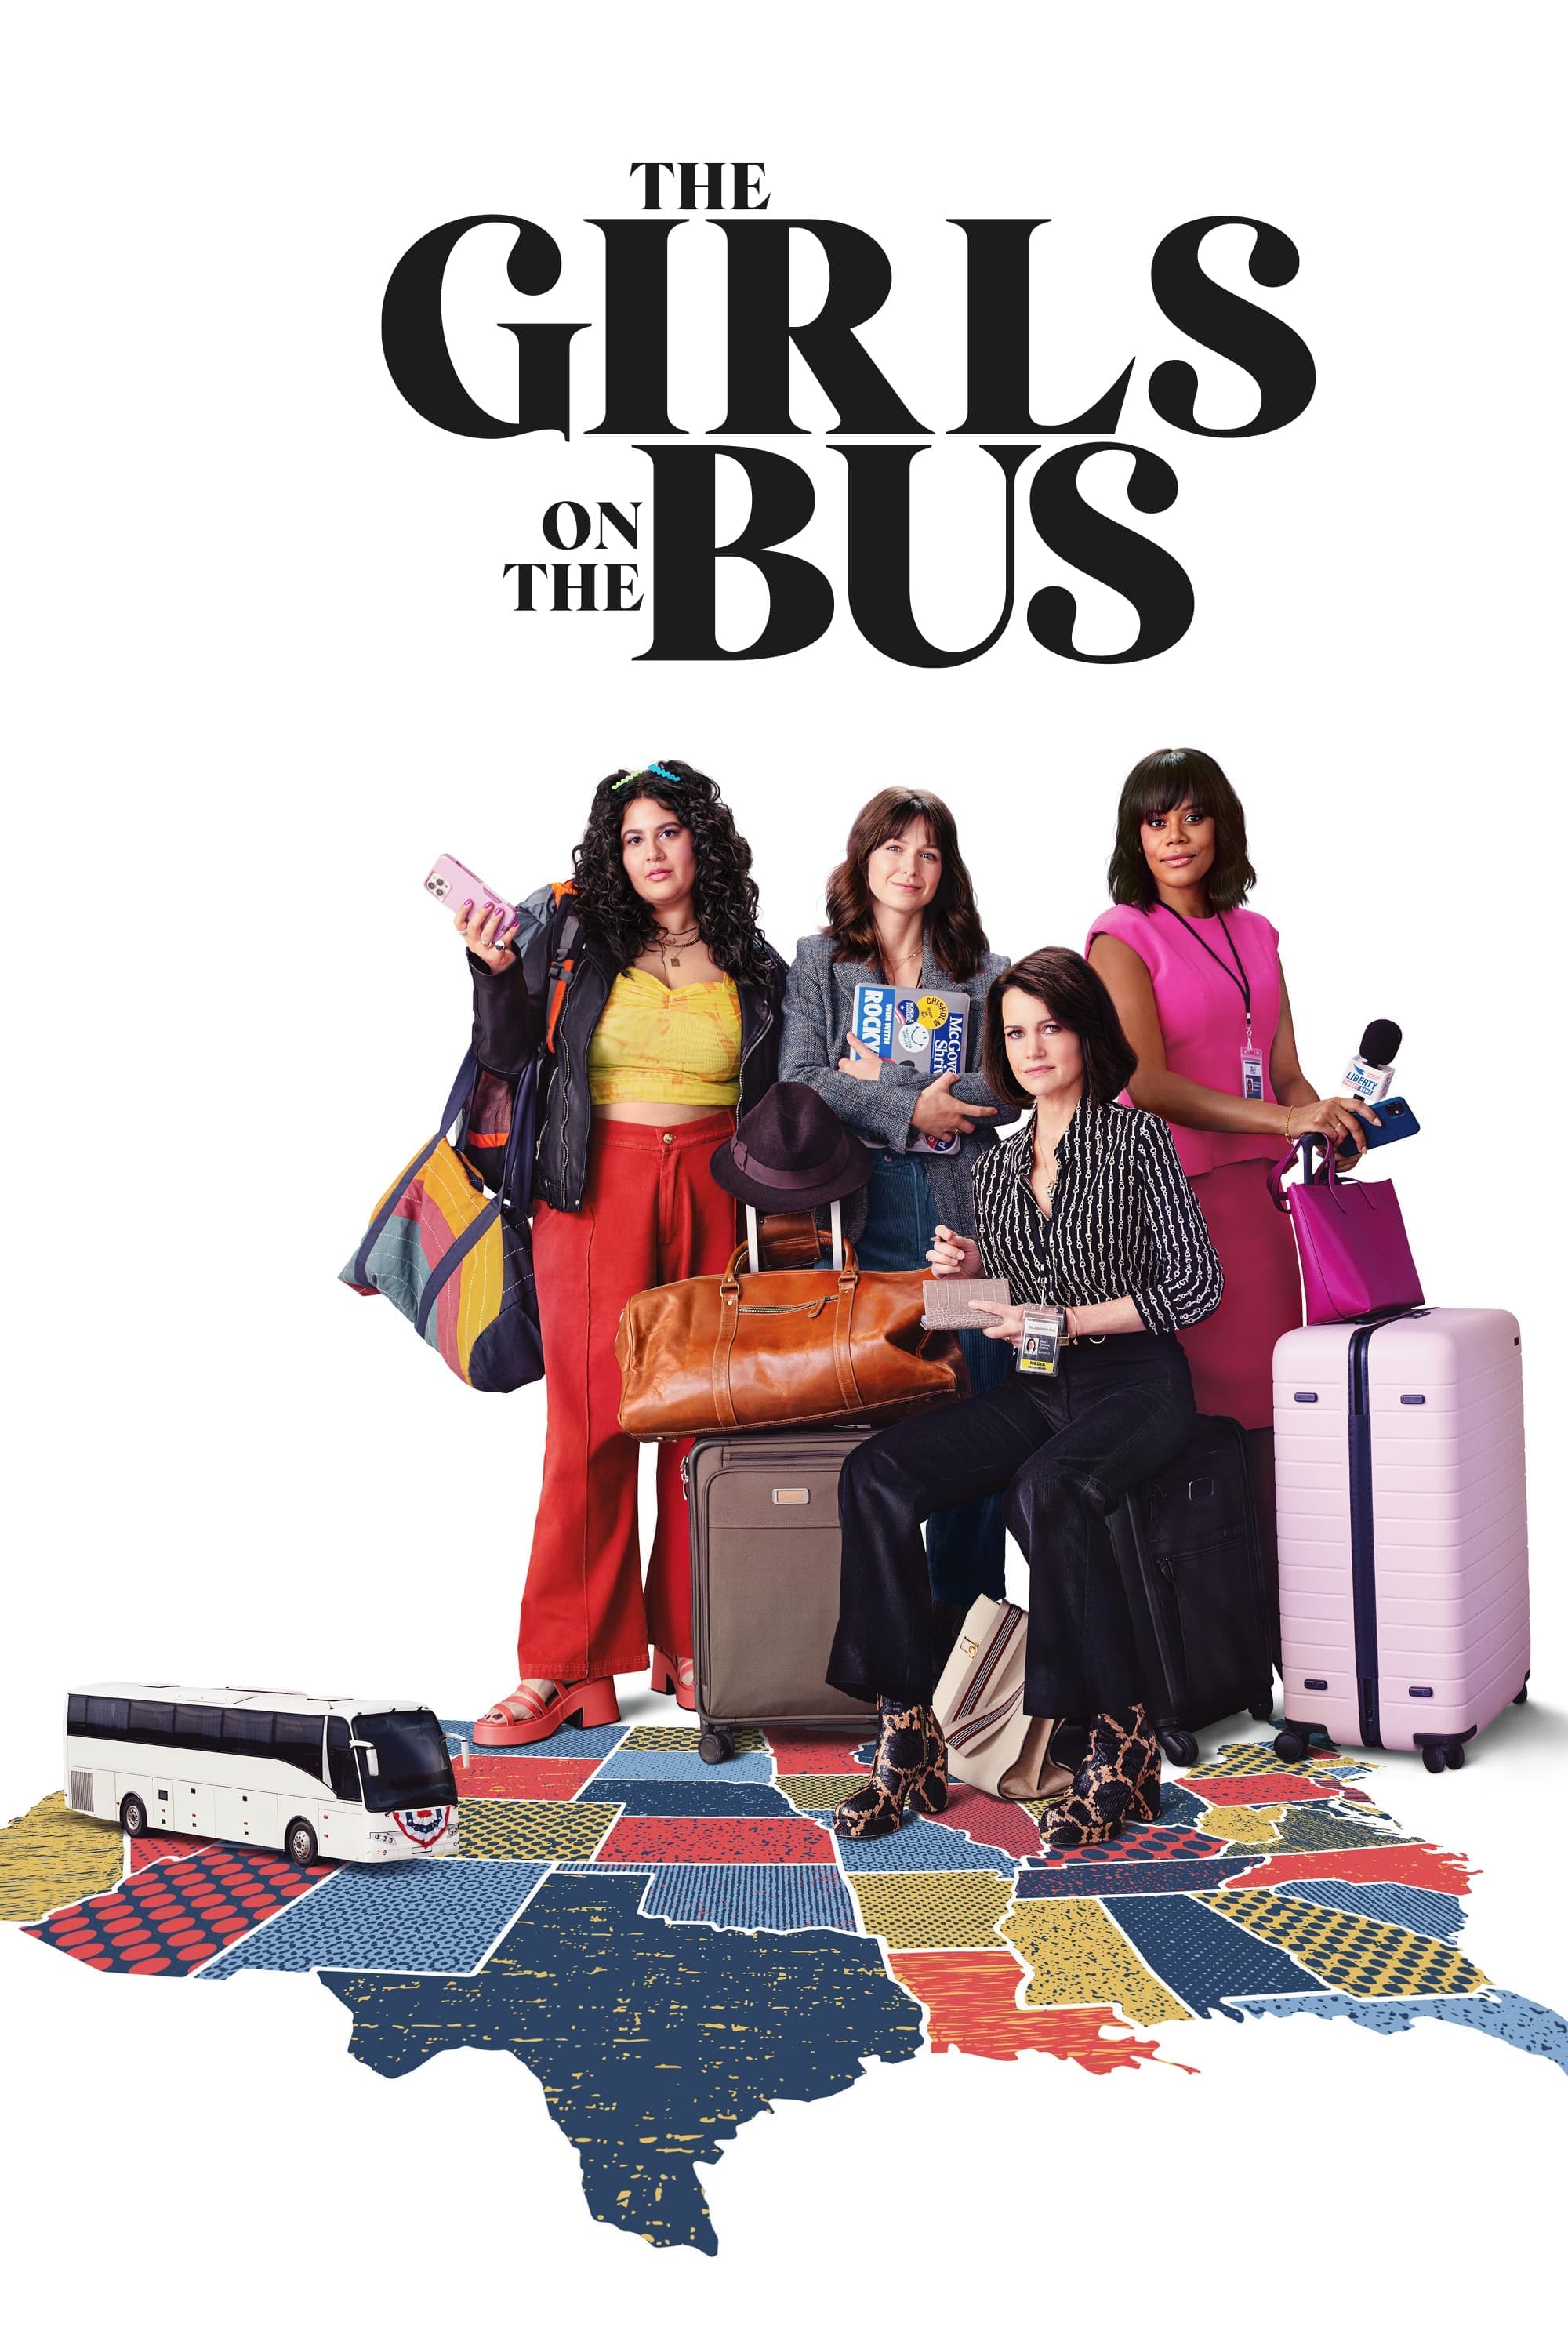 The Girls on the Bus Image